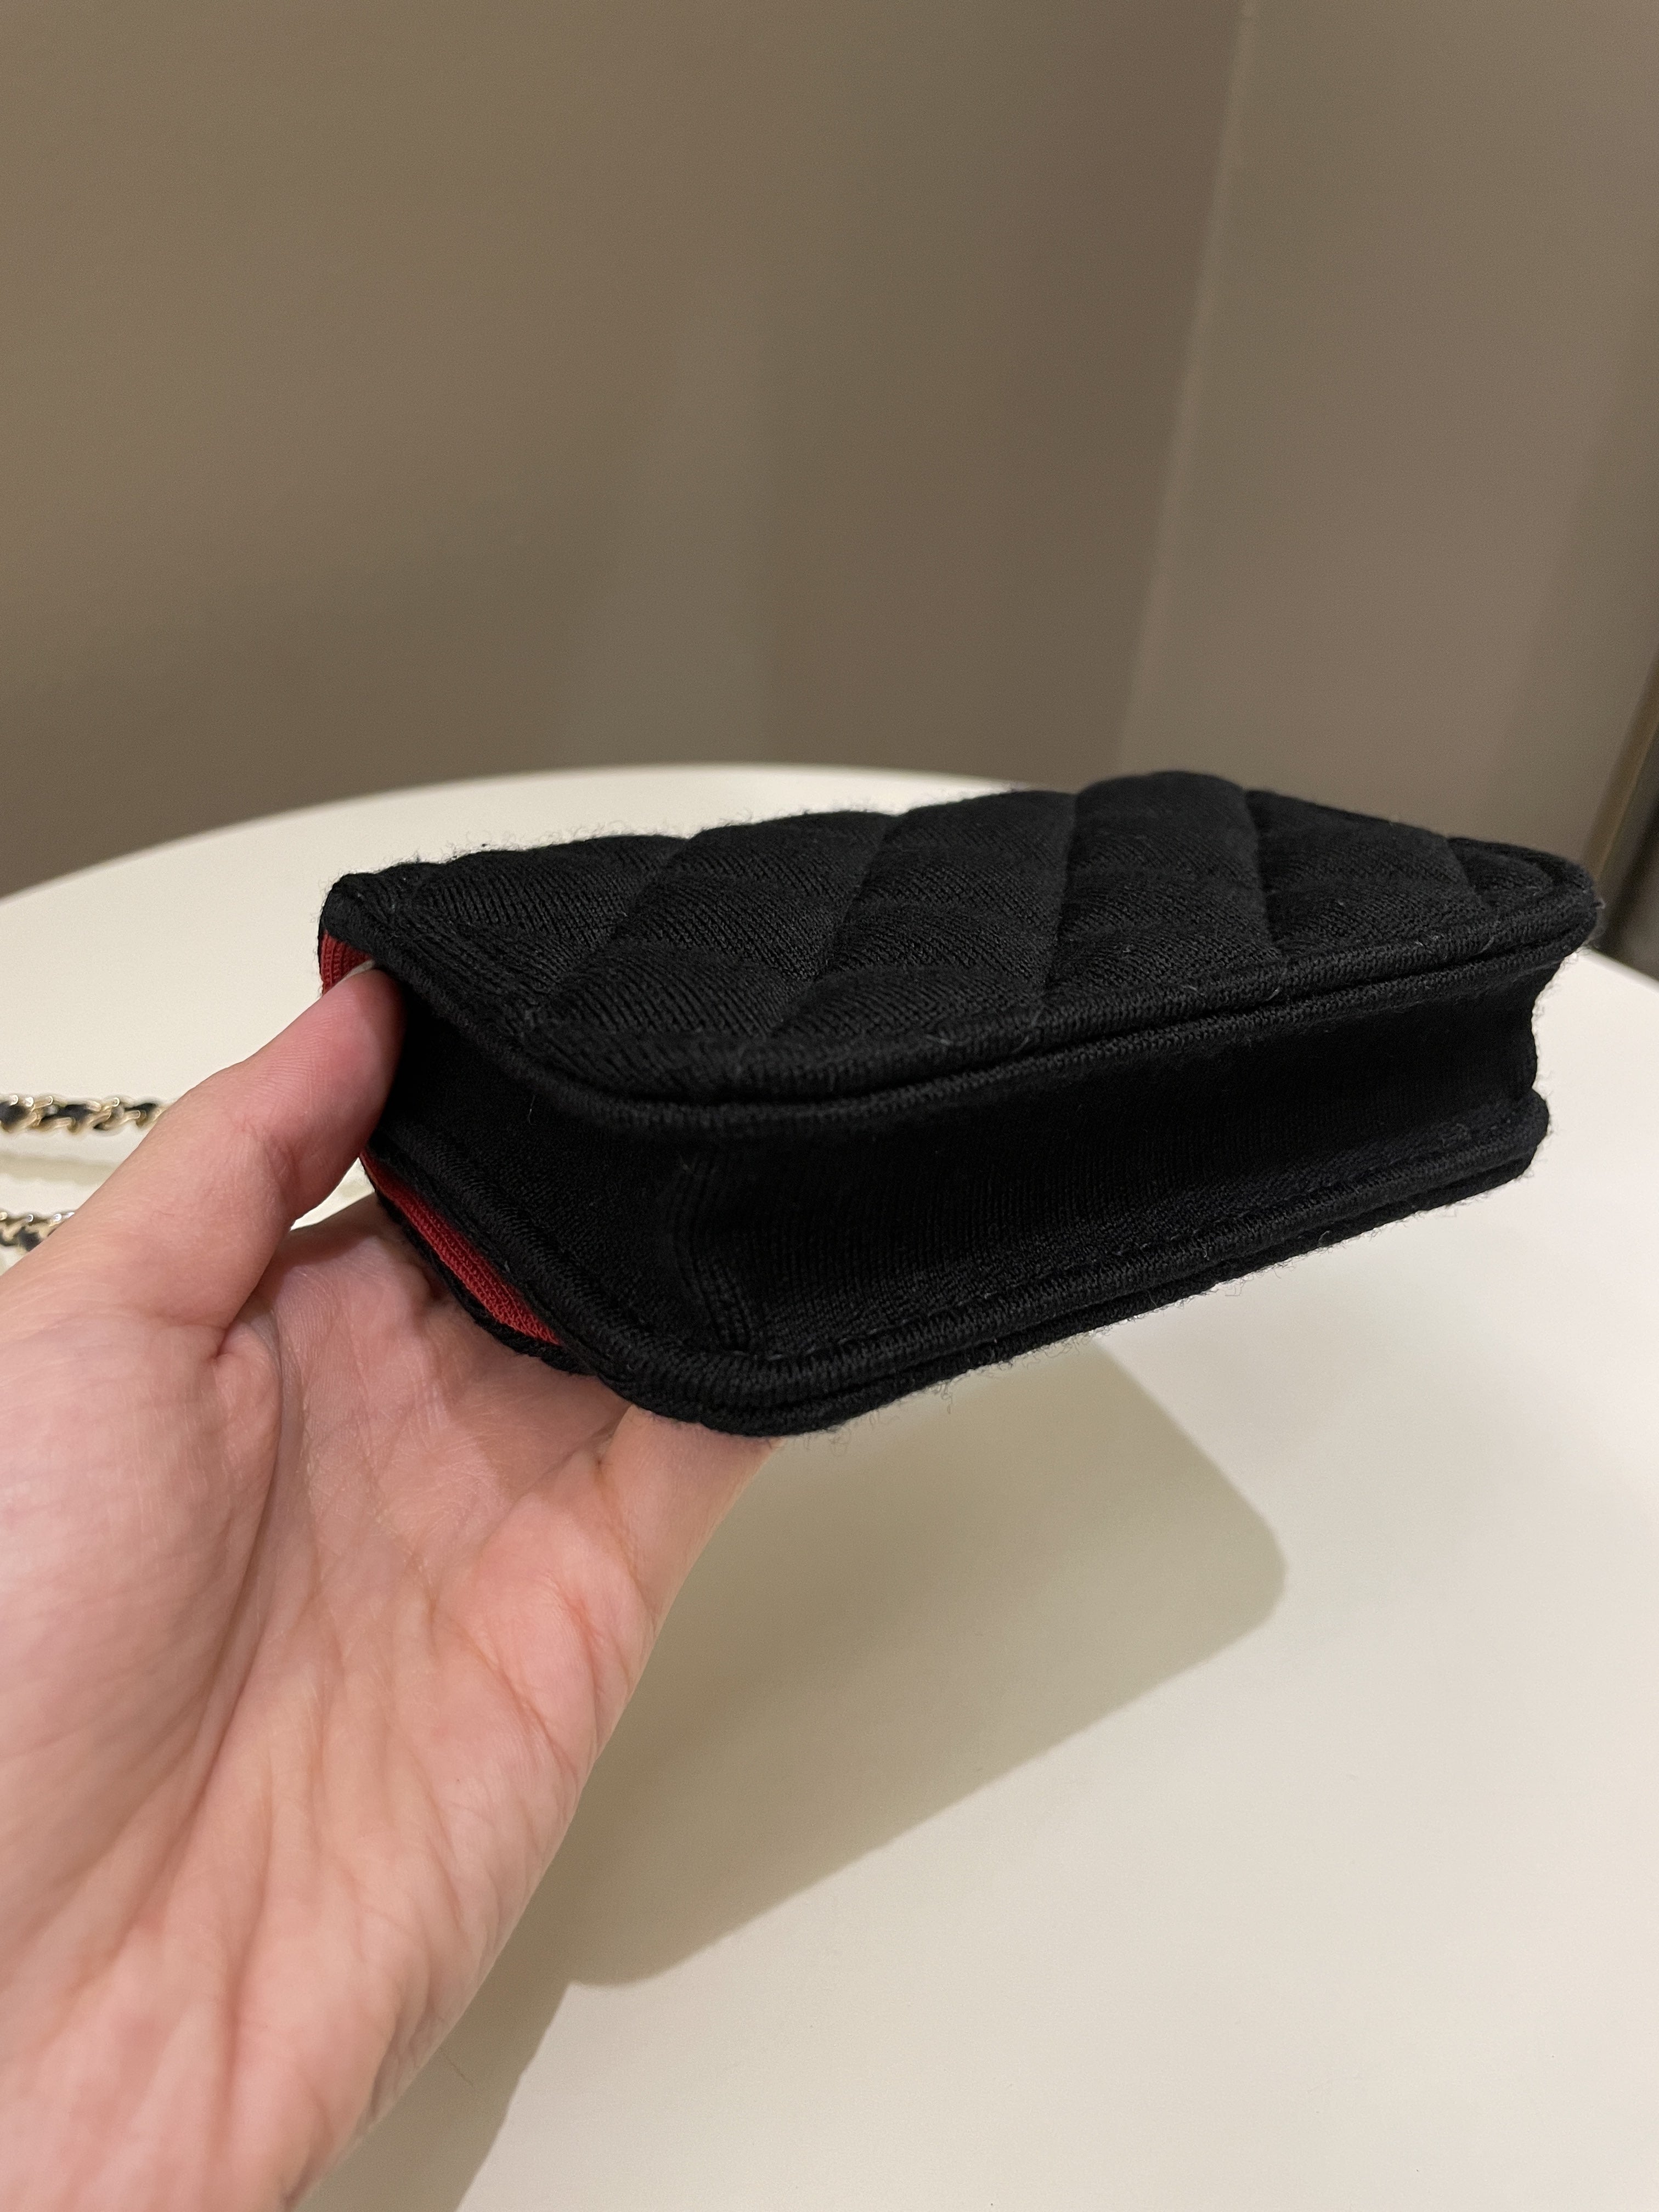 Chanel 23C Quilted VIP Clutch On Chain
Black Jersey/ Red Interior